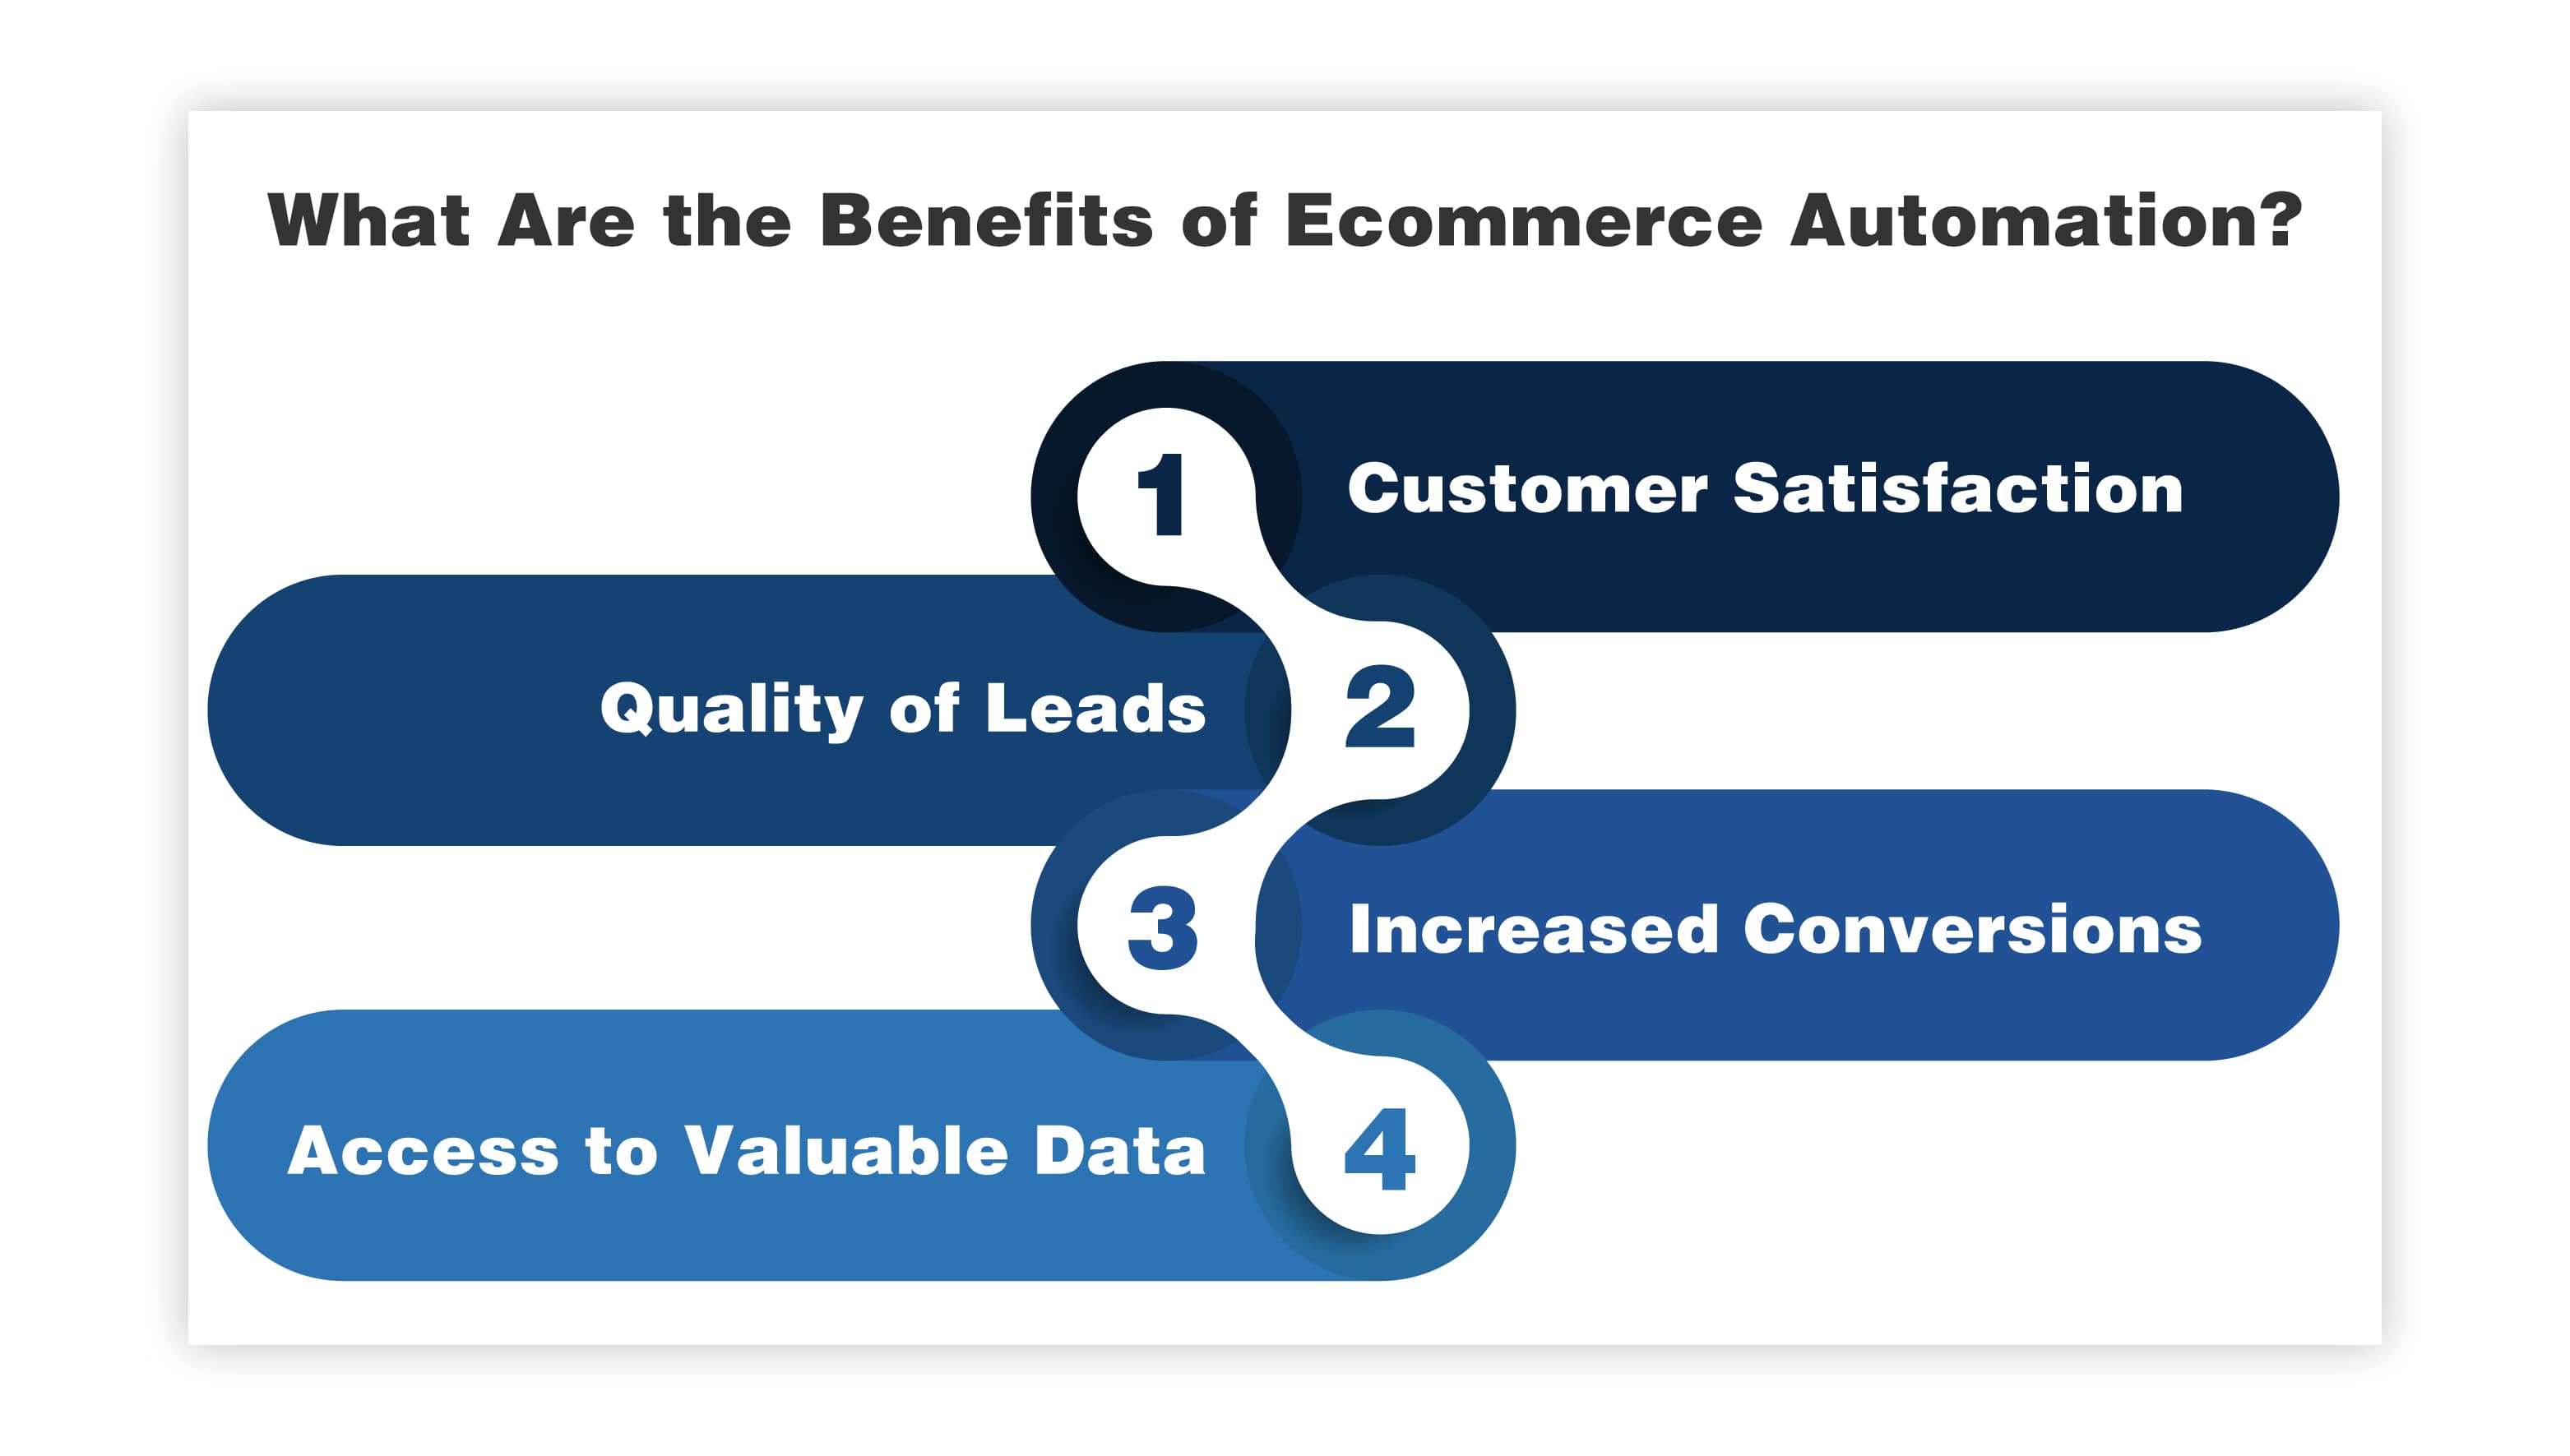 What Are the Benefits of Ecommerce Automation?